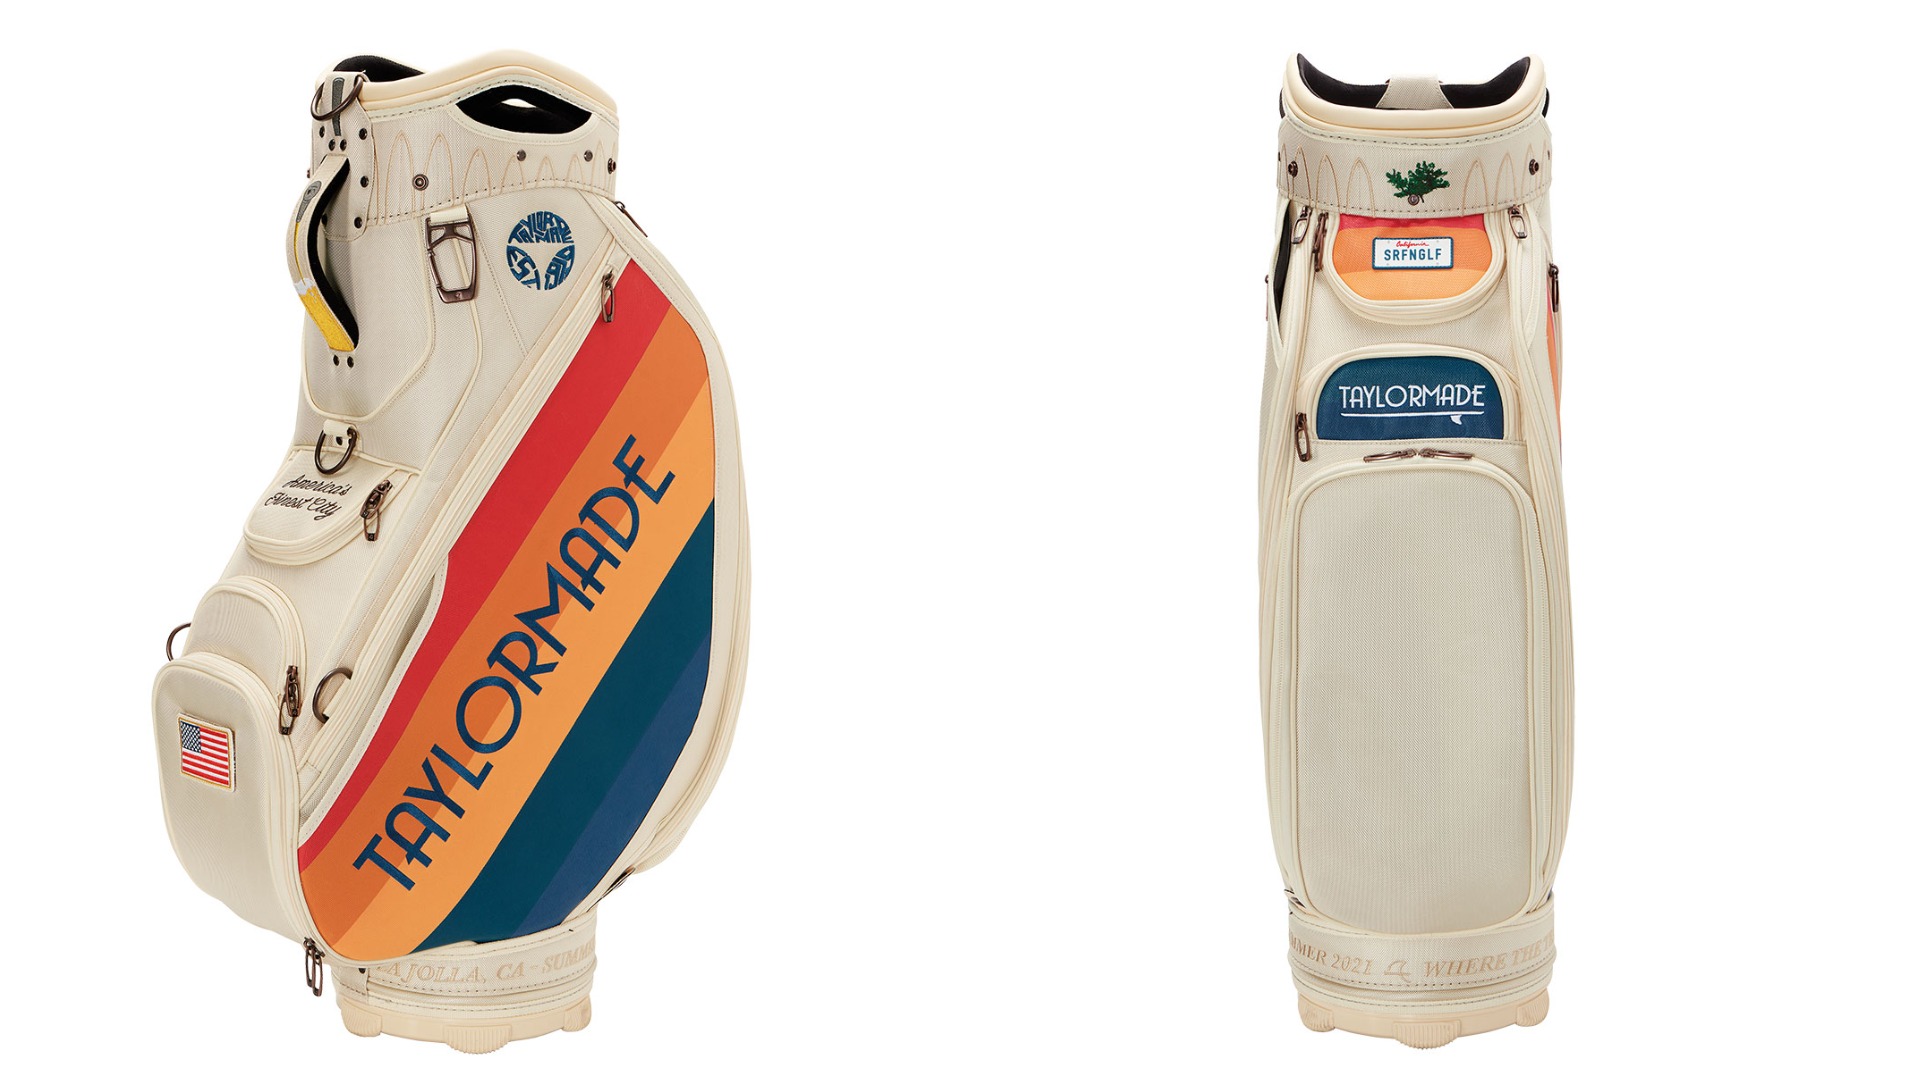 TaylorMade releases INCREDIBLE US Open Tour Bag for Torrey Pines! GolfMagic